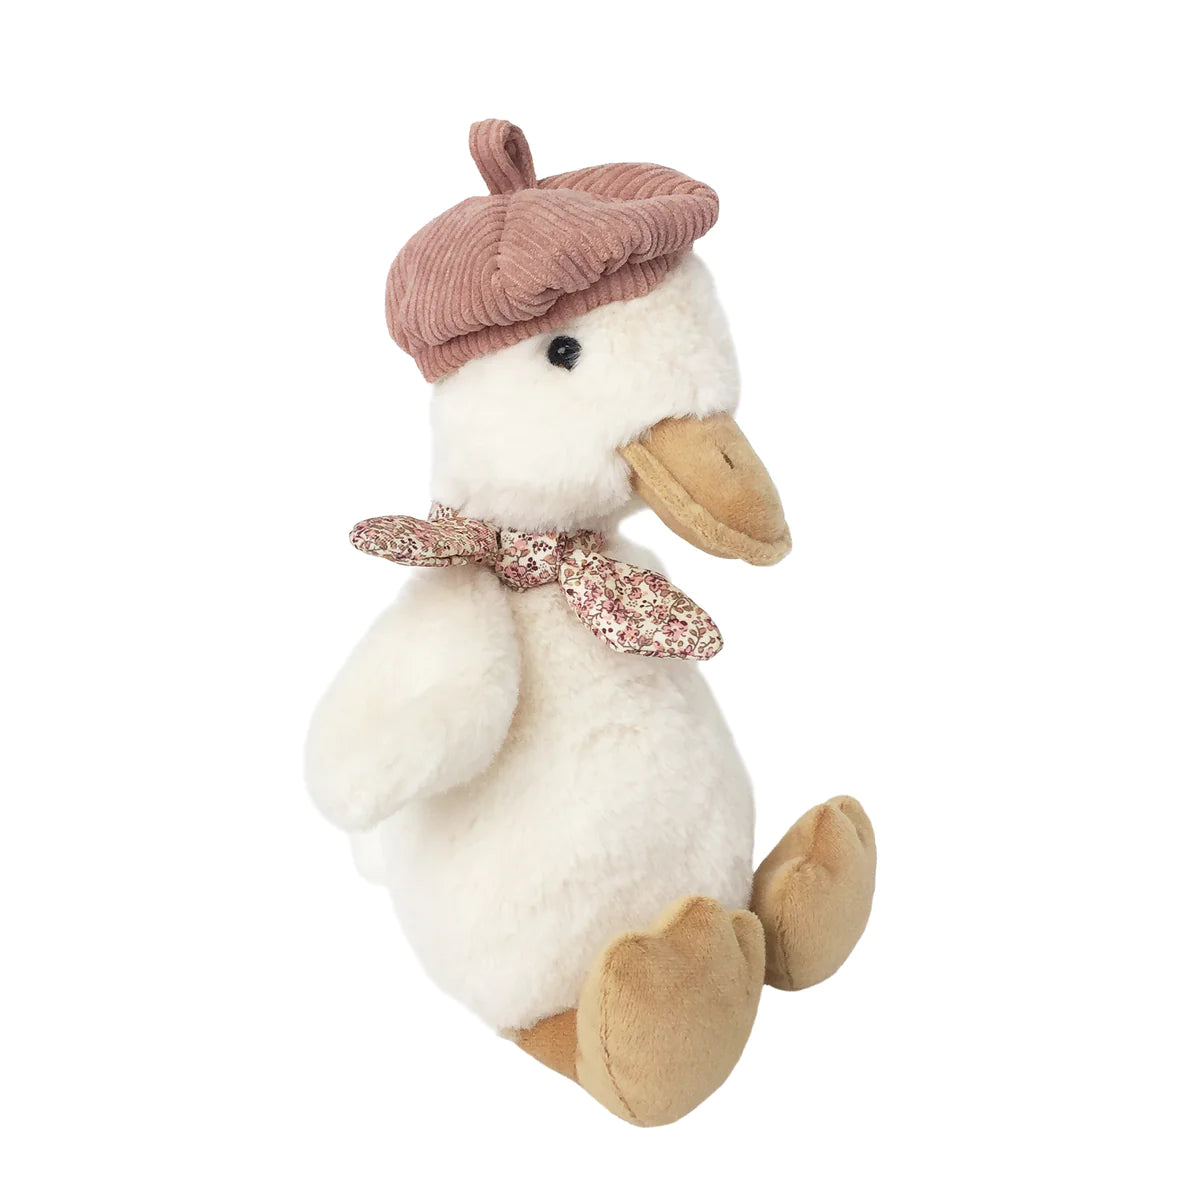 Colette the Duck Plush Toy - P I C N I C 